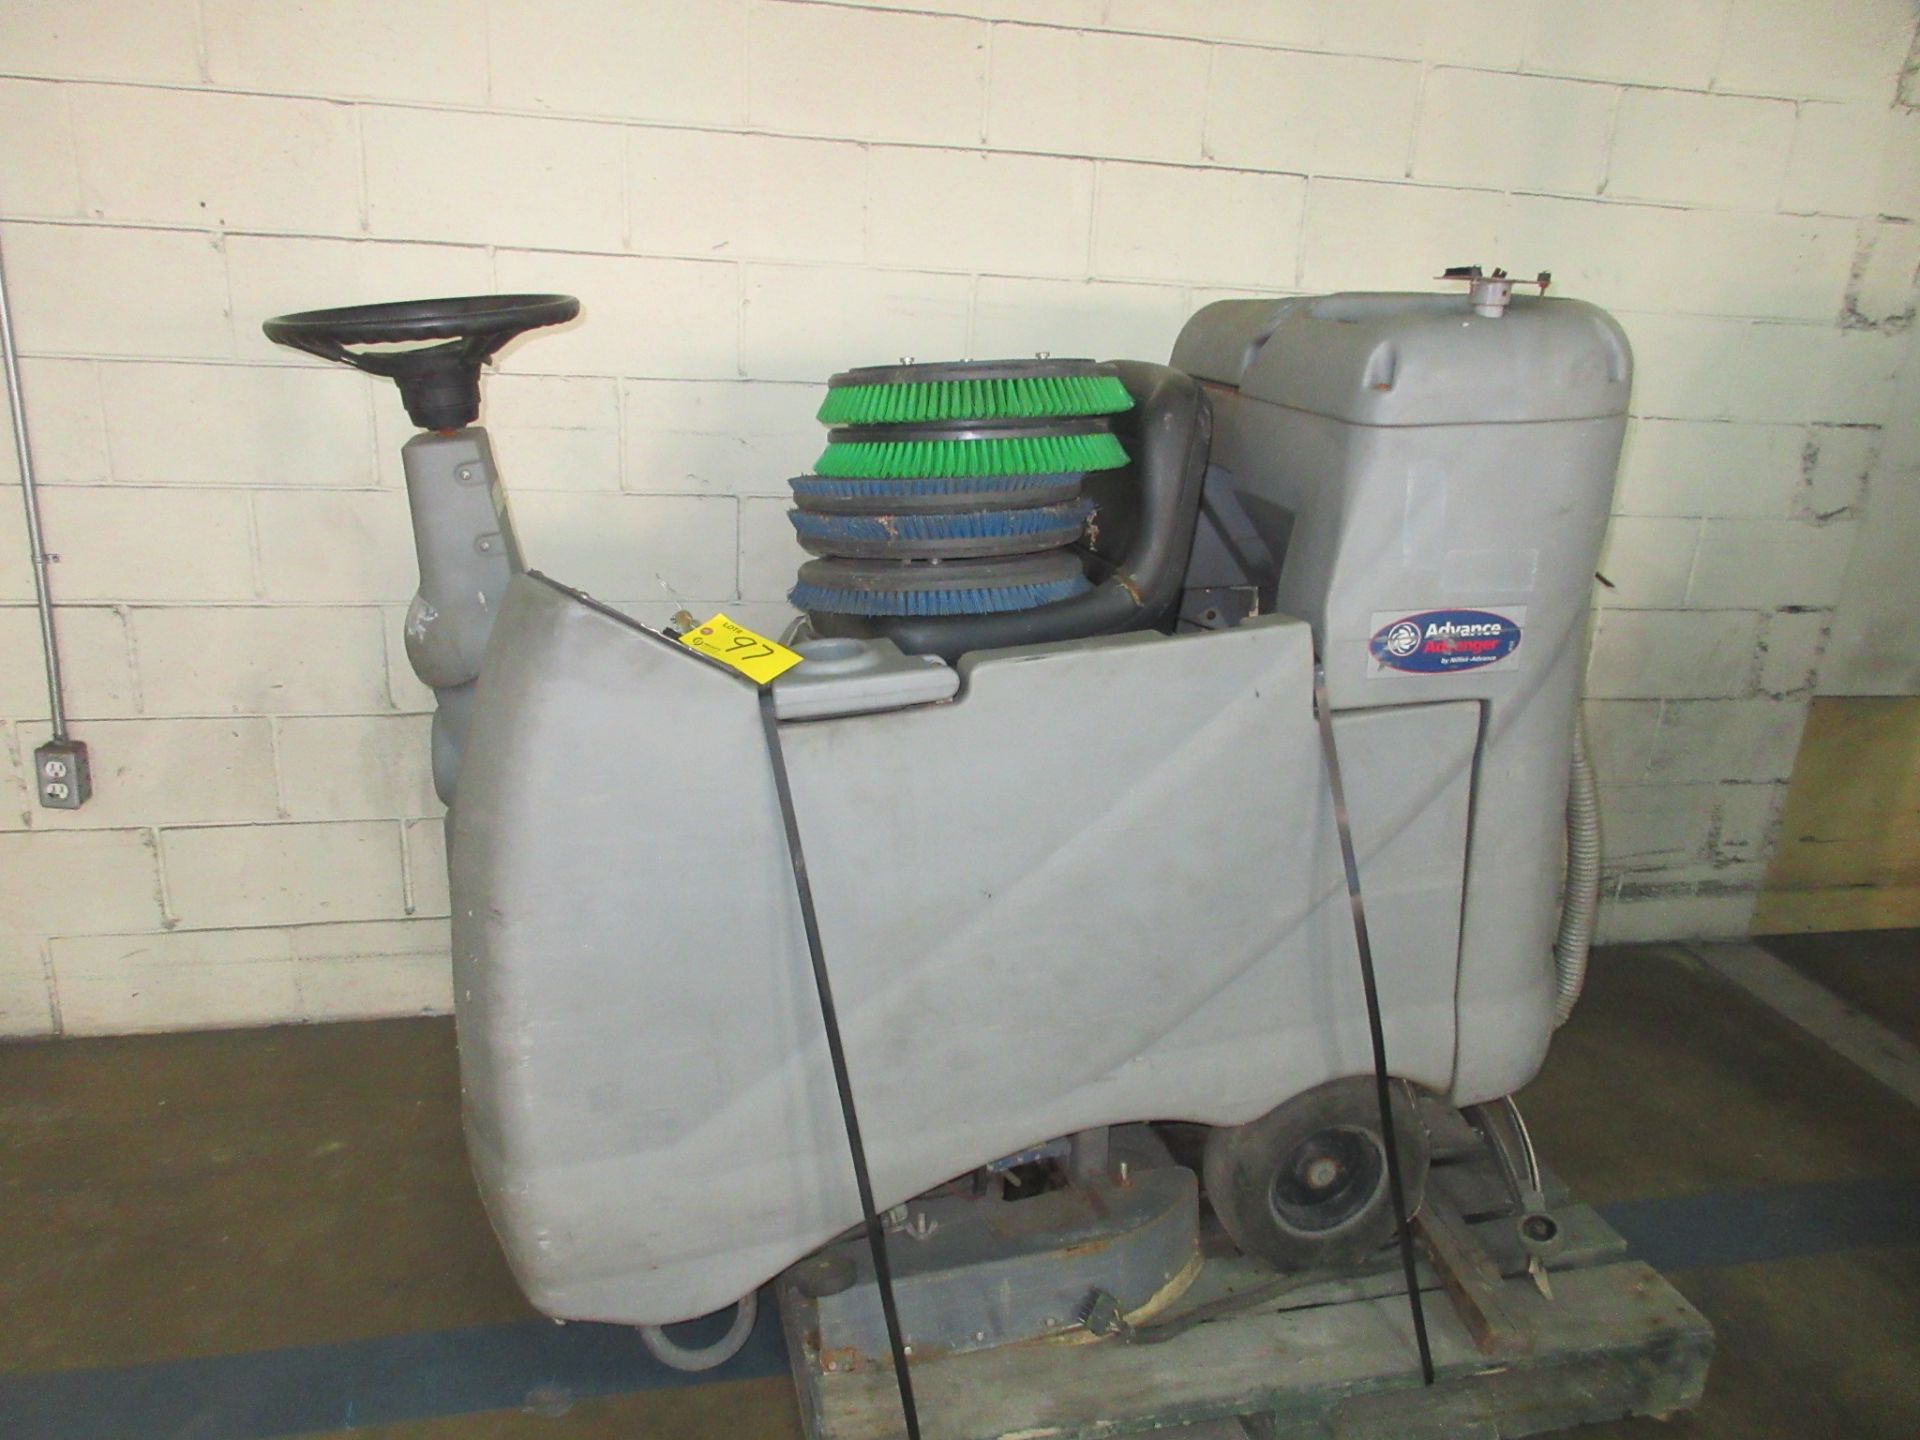 ADVANTAGE AVENGER / NILFISH-ADVANCE 45A FLOOR SWEEPER W/ EXTRA BRUSHES (LOCATED IN THOROLD, ON) (